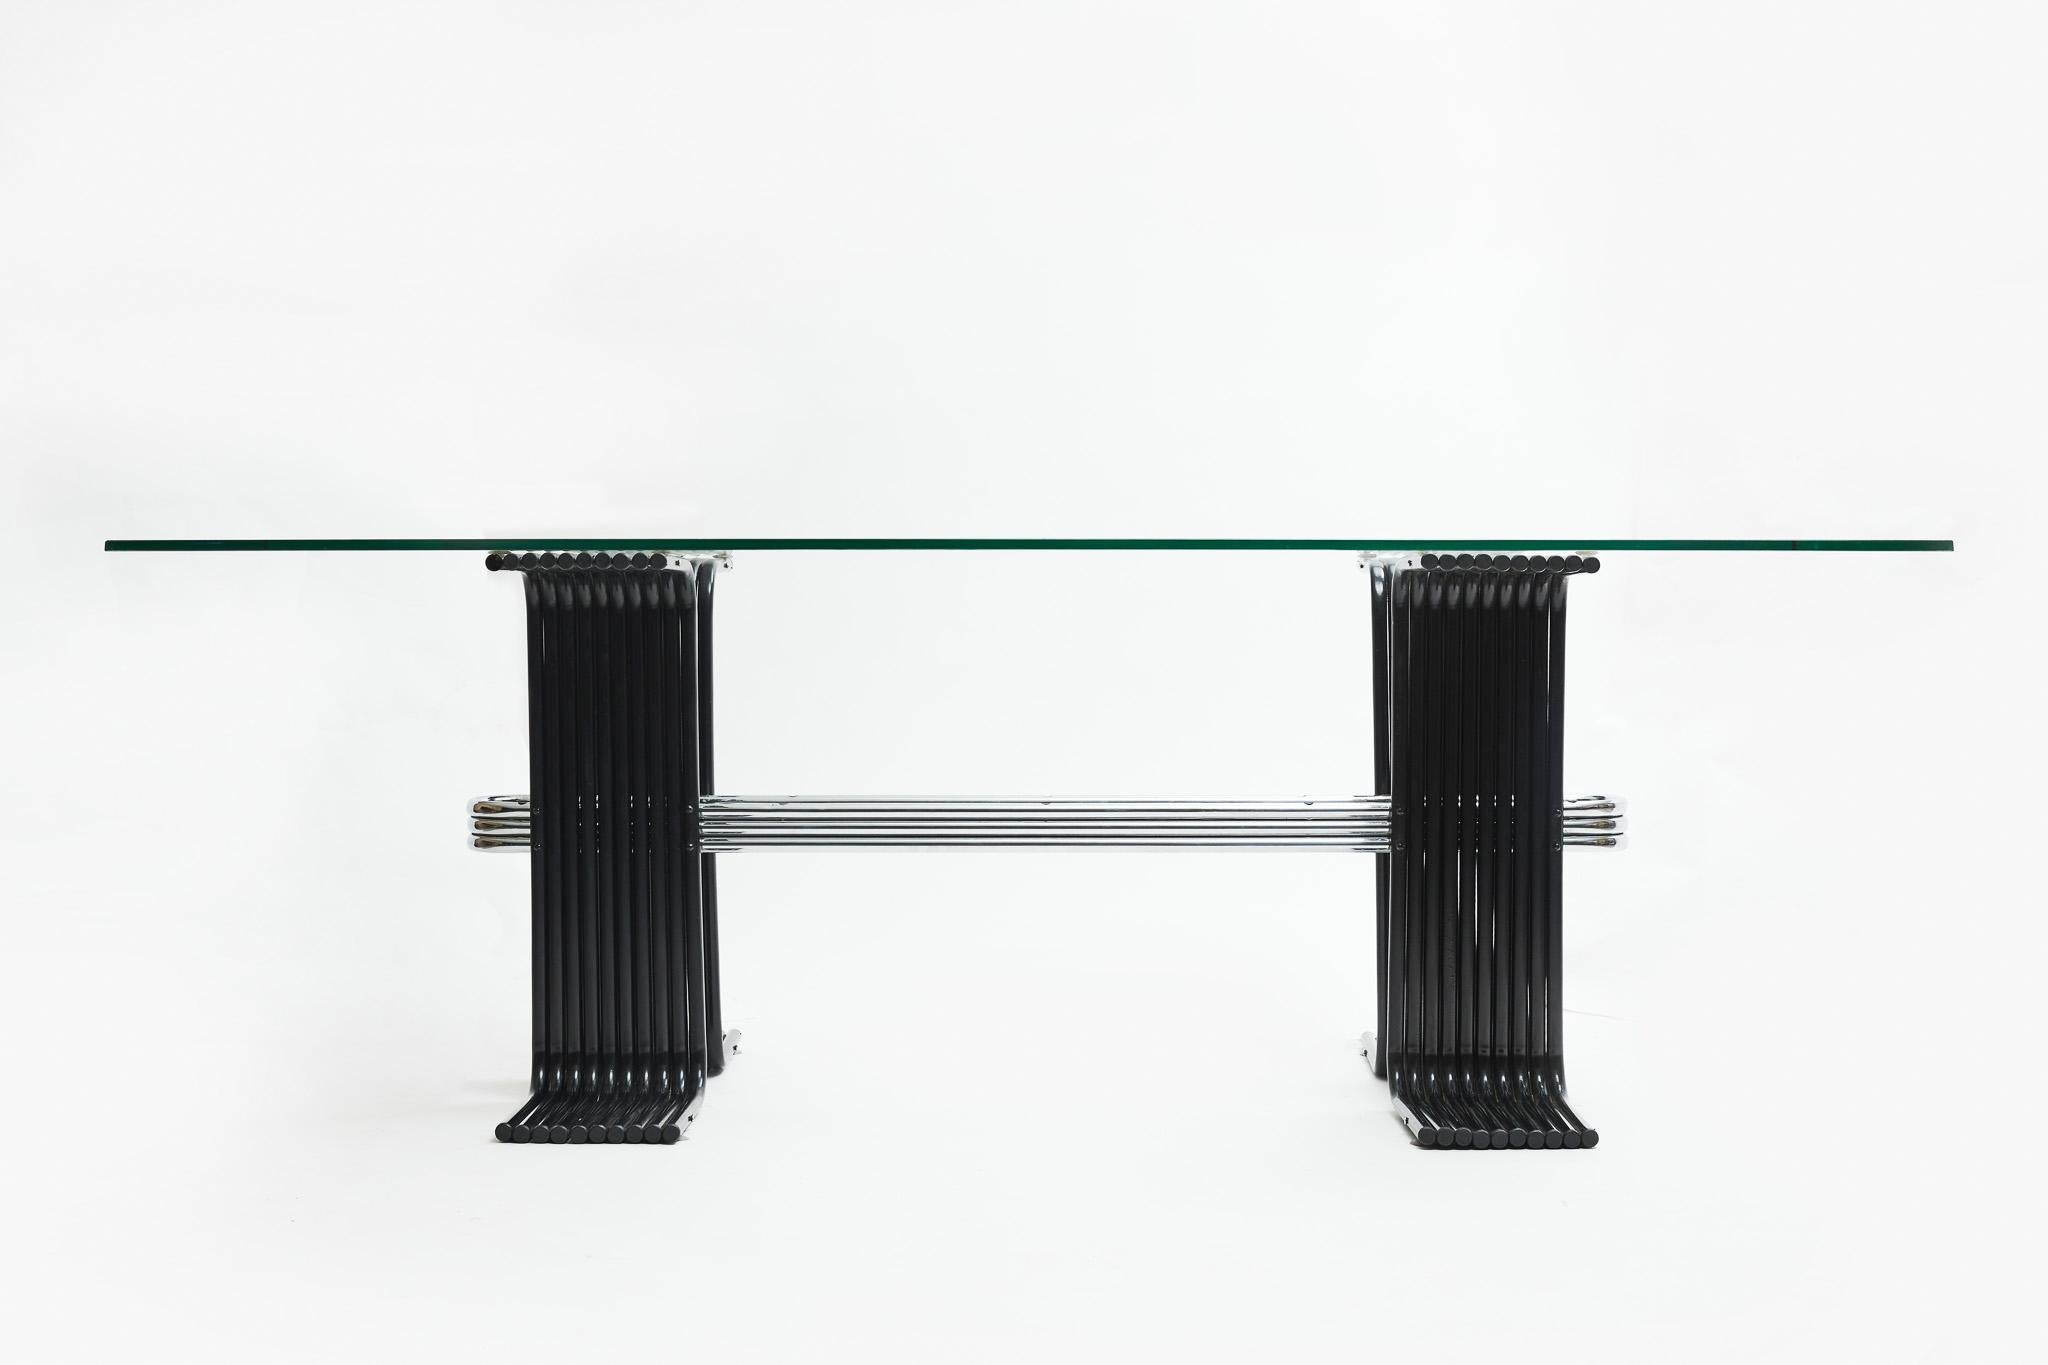 This mid-century modern dining table, designed by Forma in the 1970s in Brazil, is available today. Painted in black iron, with chromed metal accents and a 10 mm glass top, it is nothing less than spectacular.

The monumental table has two large